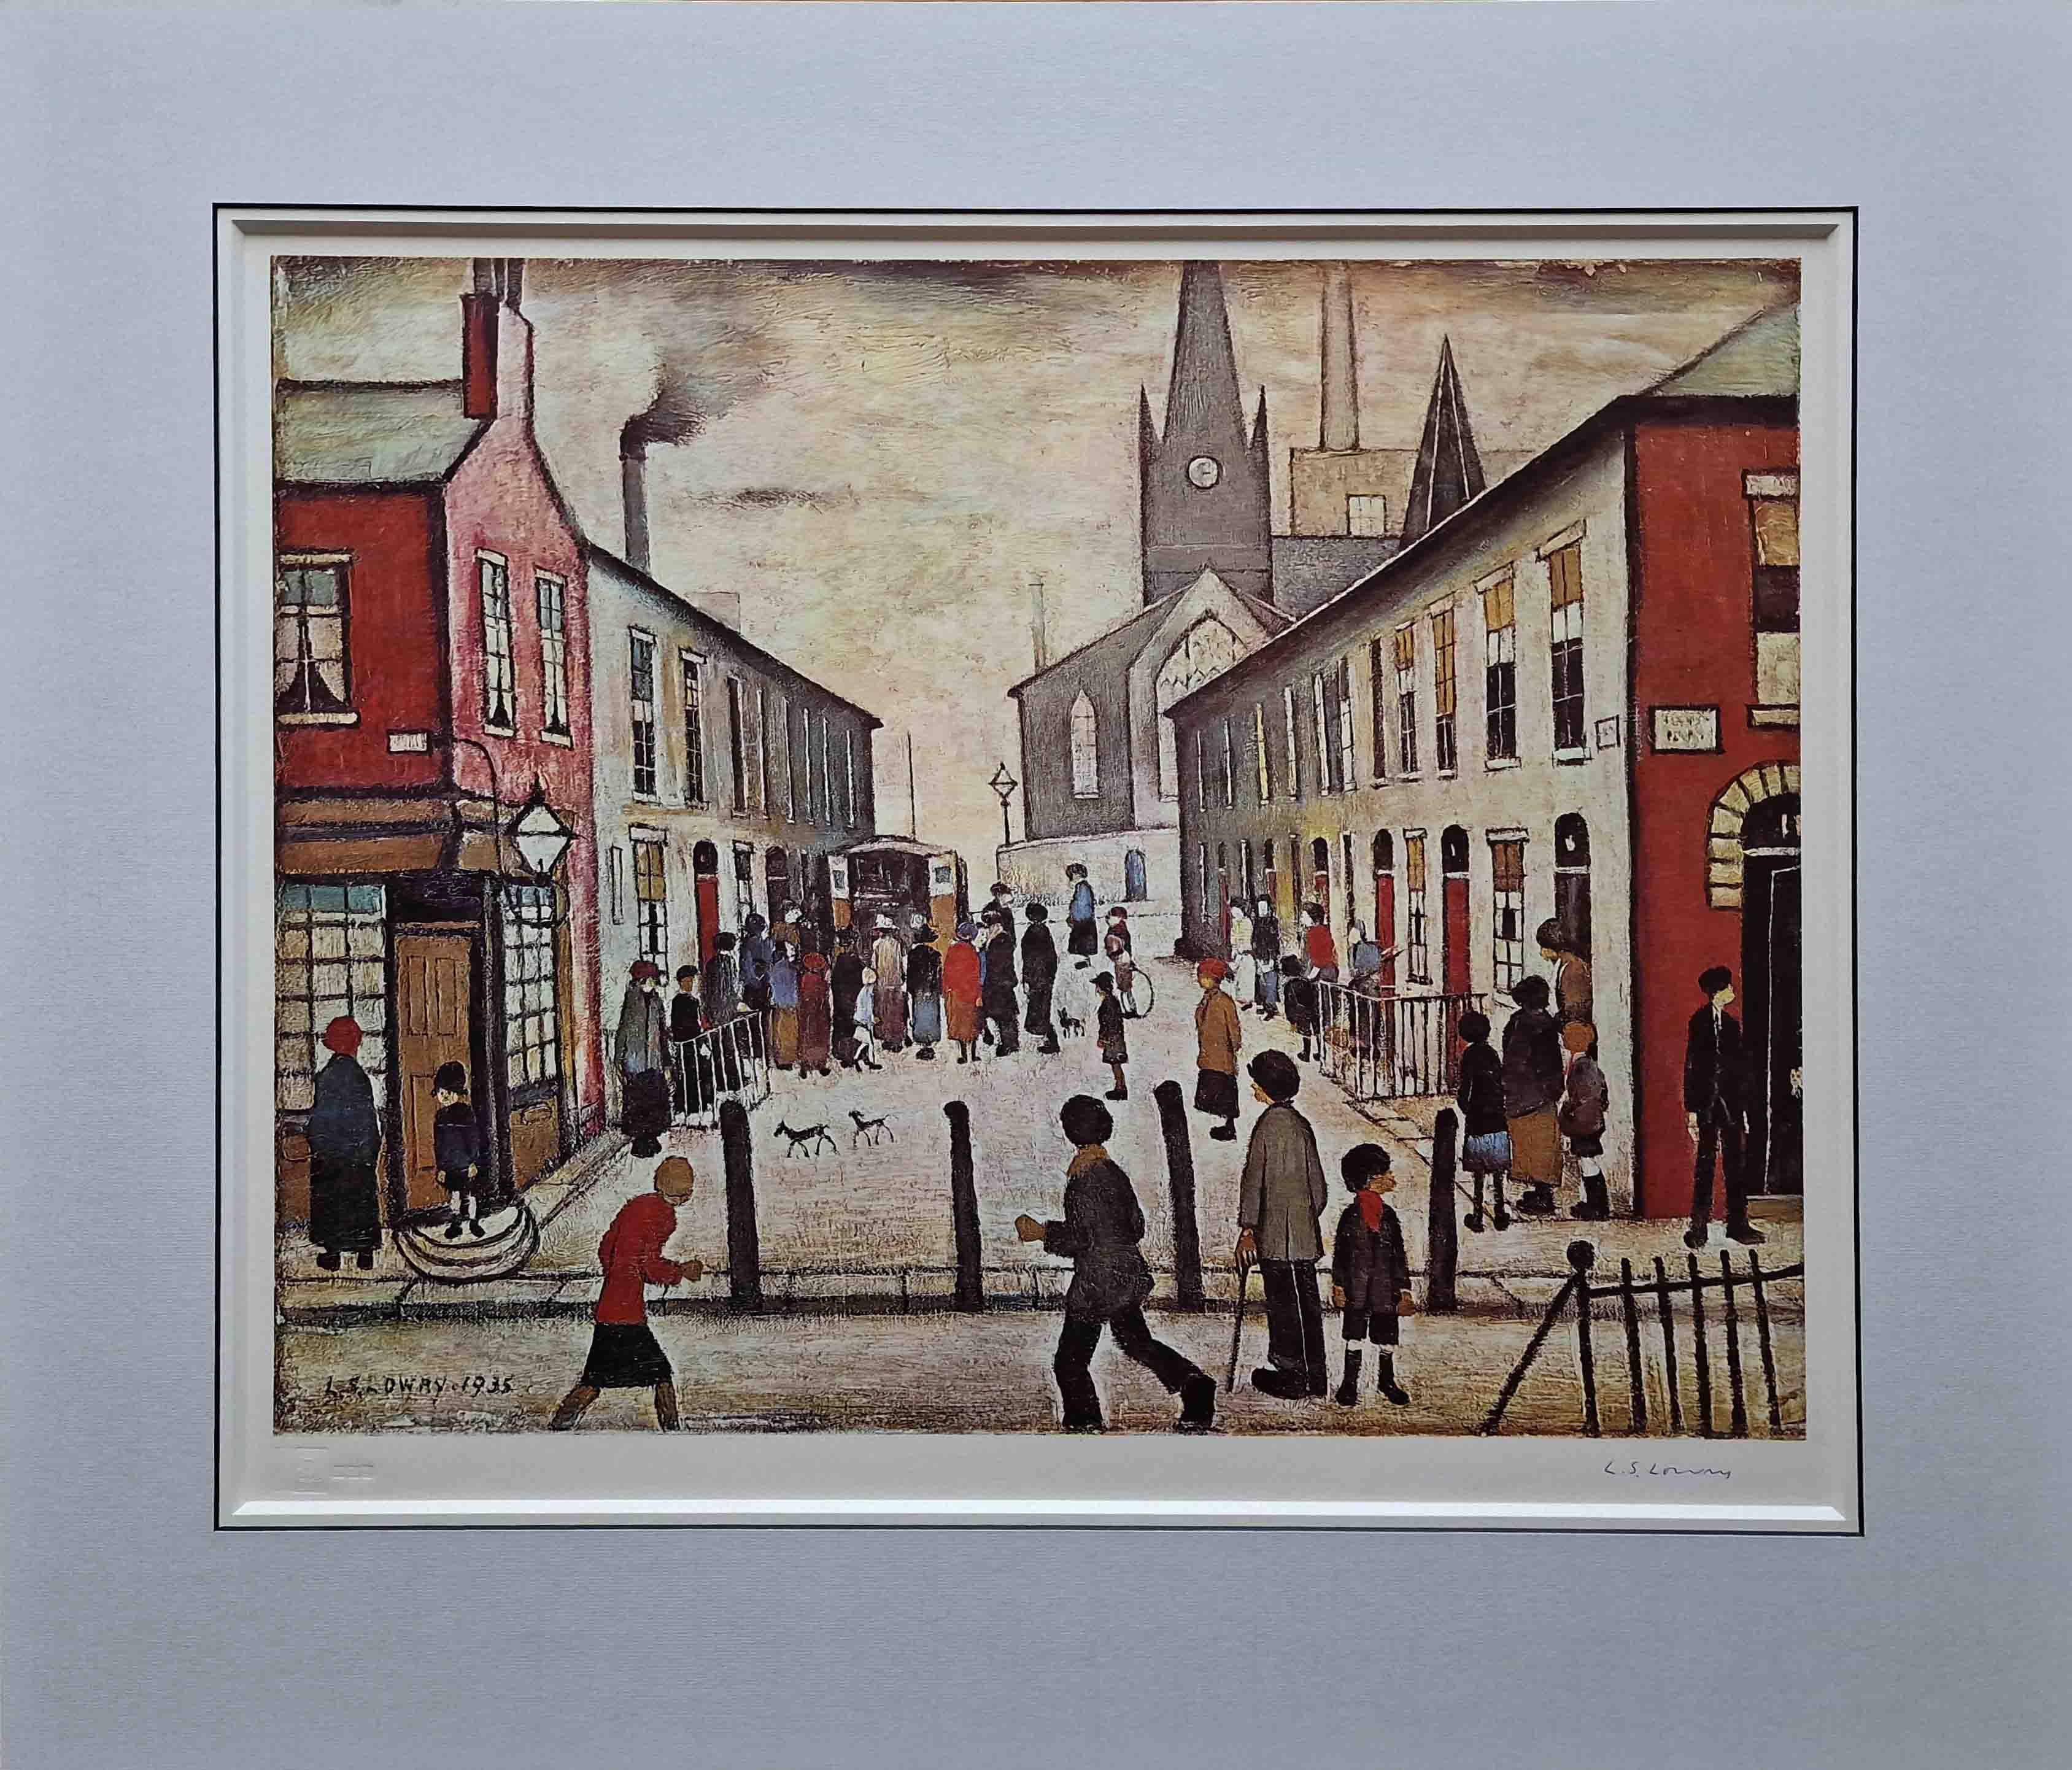 lowry fever van signed print mounted